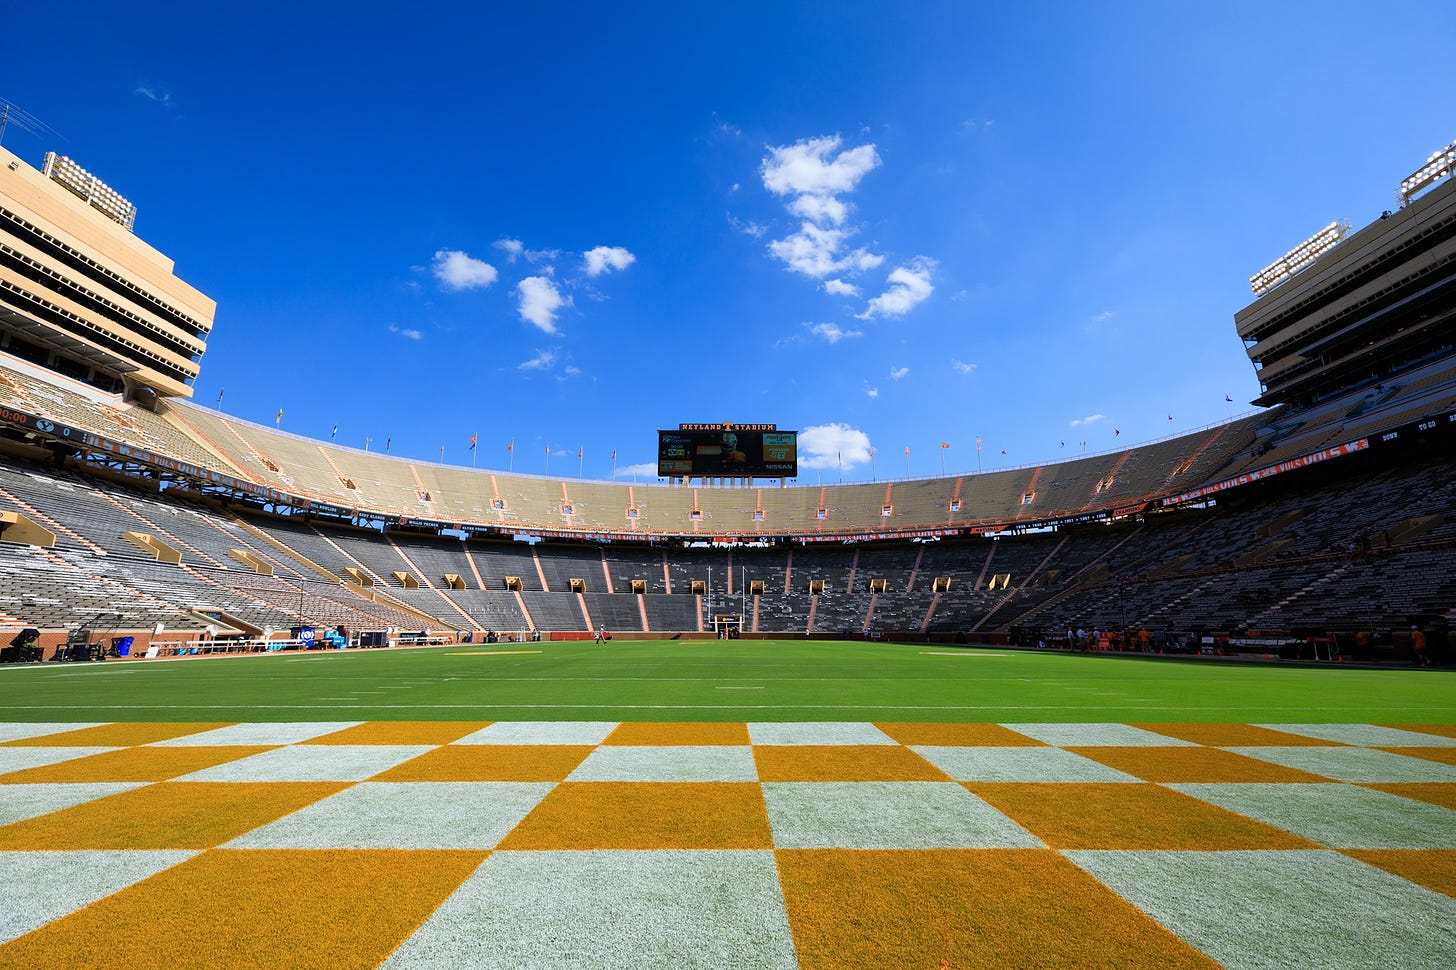 UT Knoxville on X: "Tomorrow's the day! Get behind-the-scenes access to Neyland  Stadium while getting your Moderna COVID-19 vaccine. From 3 to 6 p.m., the  event is open to everyone age 18